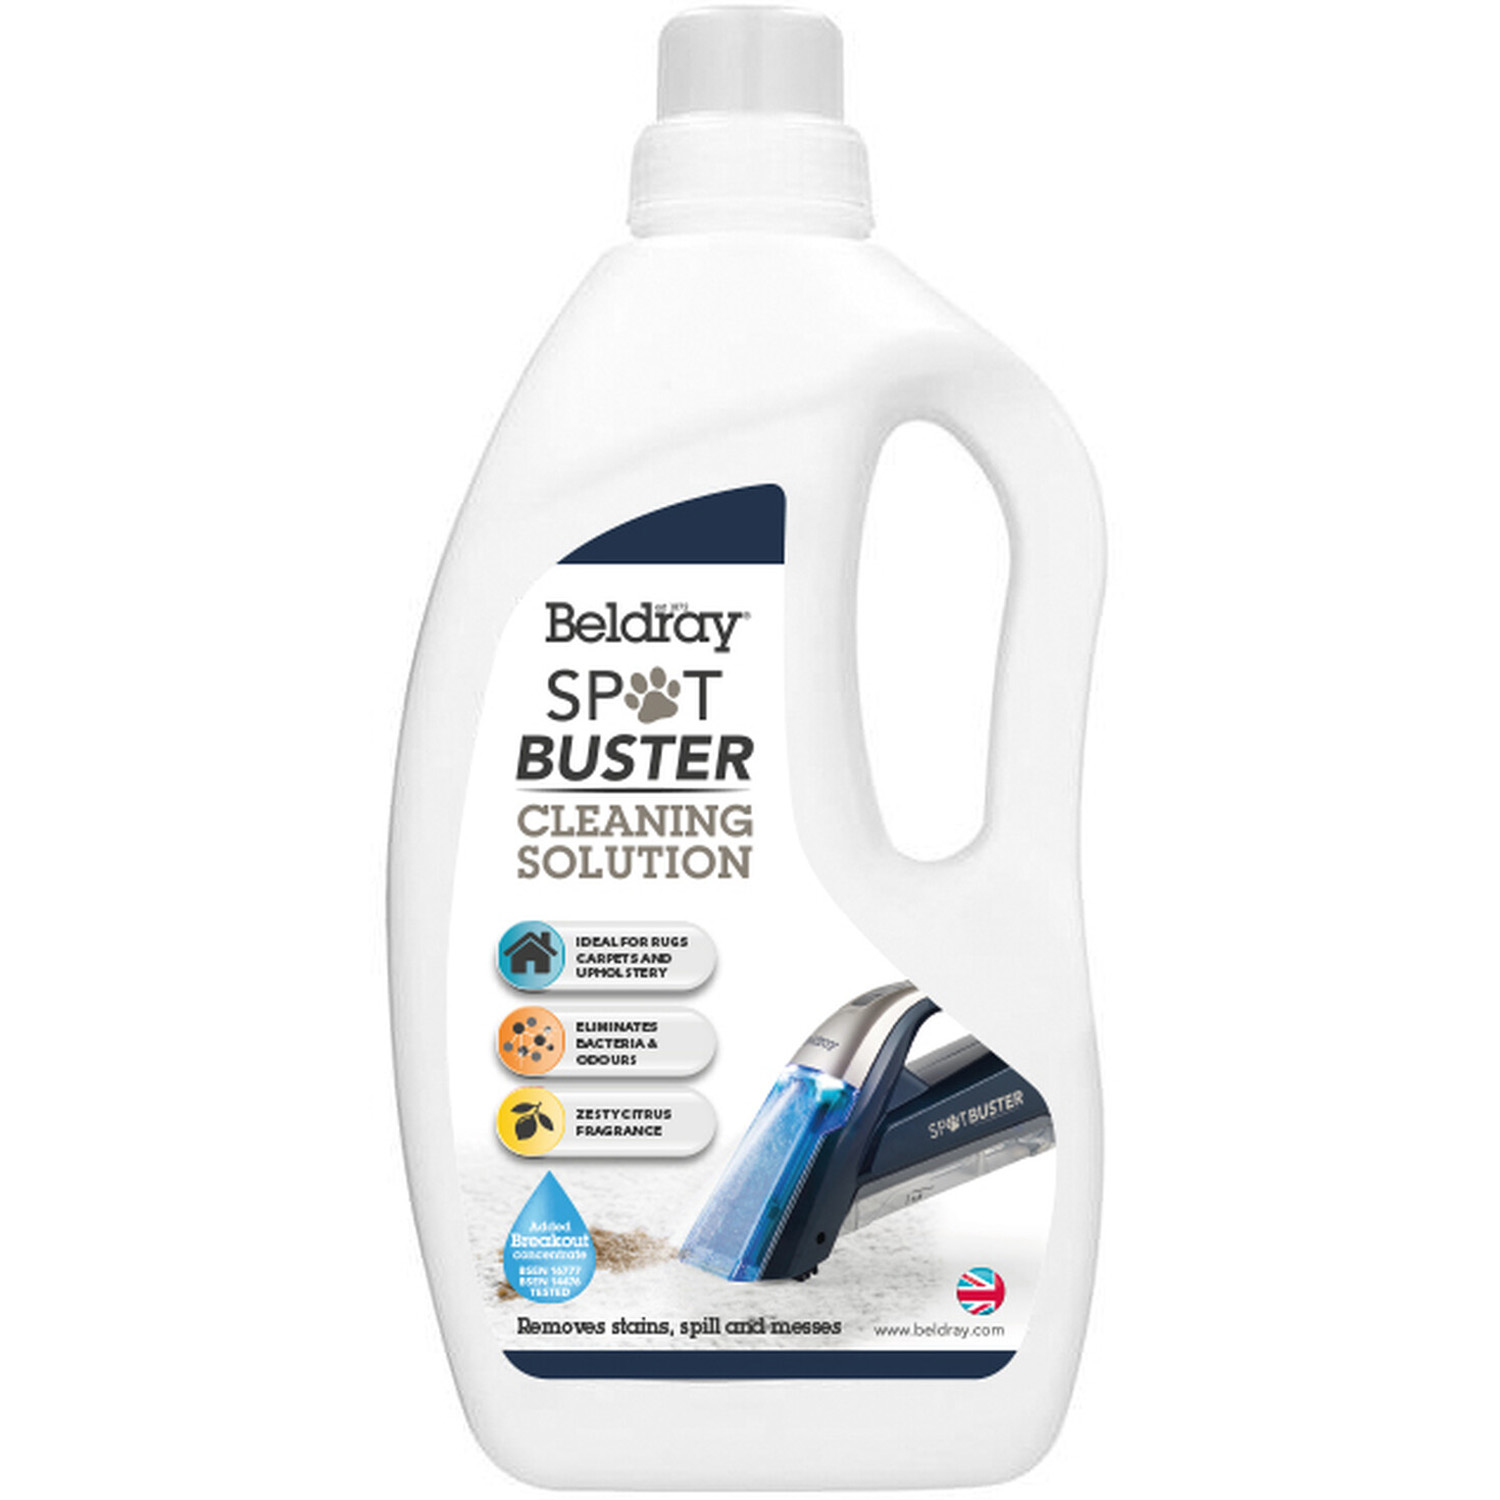 Beldray Spot Buster Carpet Cleaning Solution Image